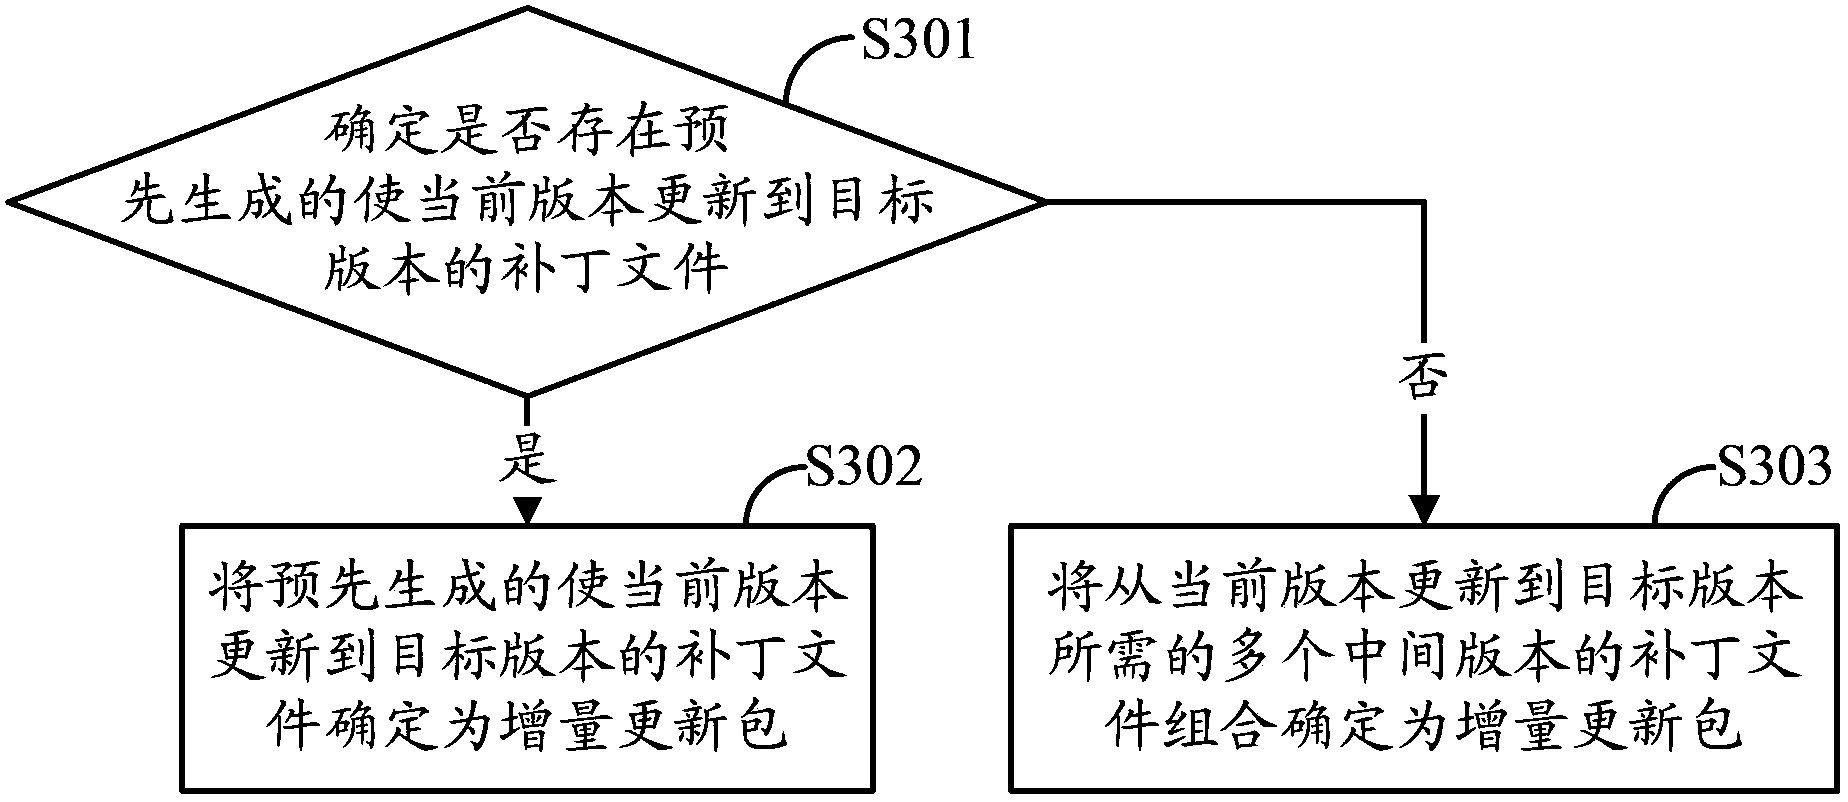 Method and apparatus for file updating, and associated equipment